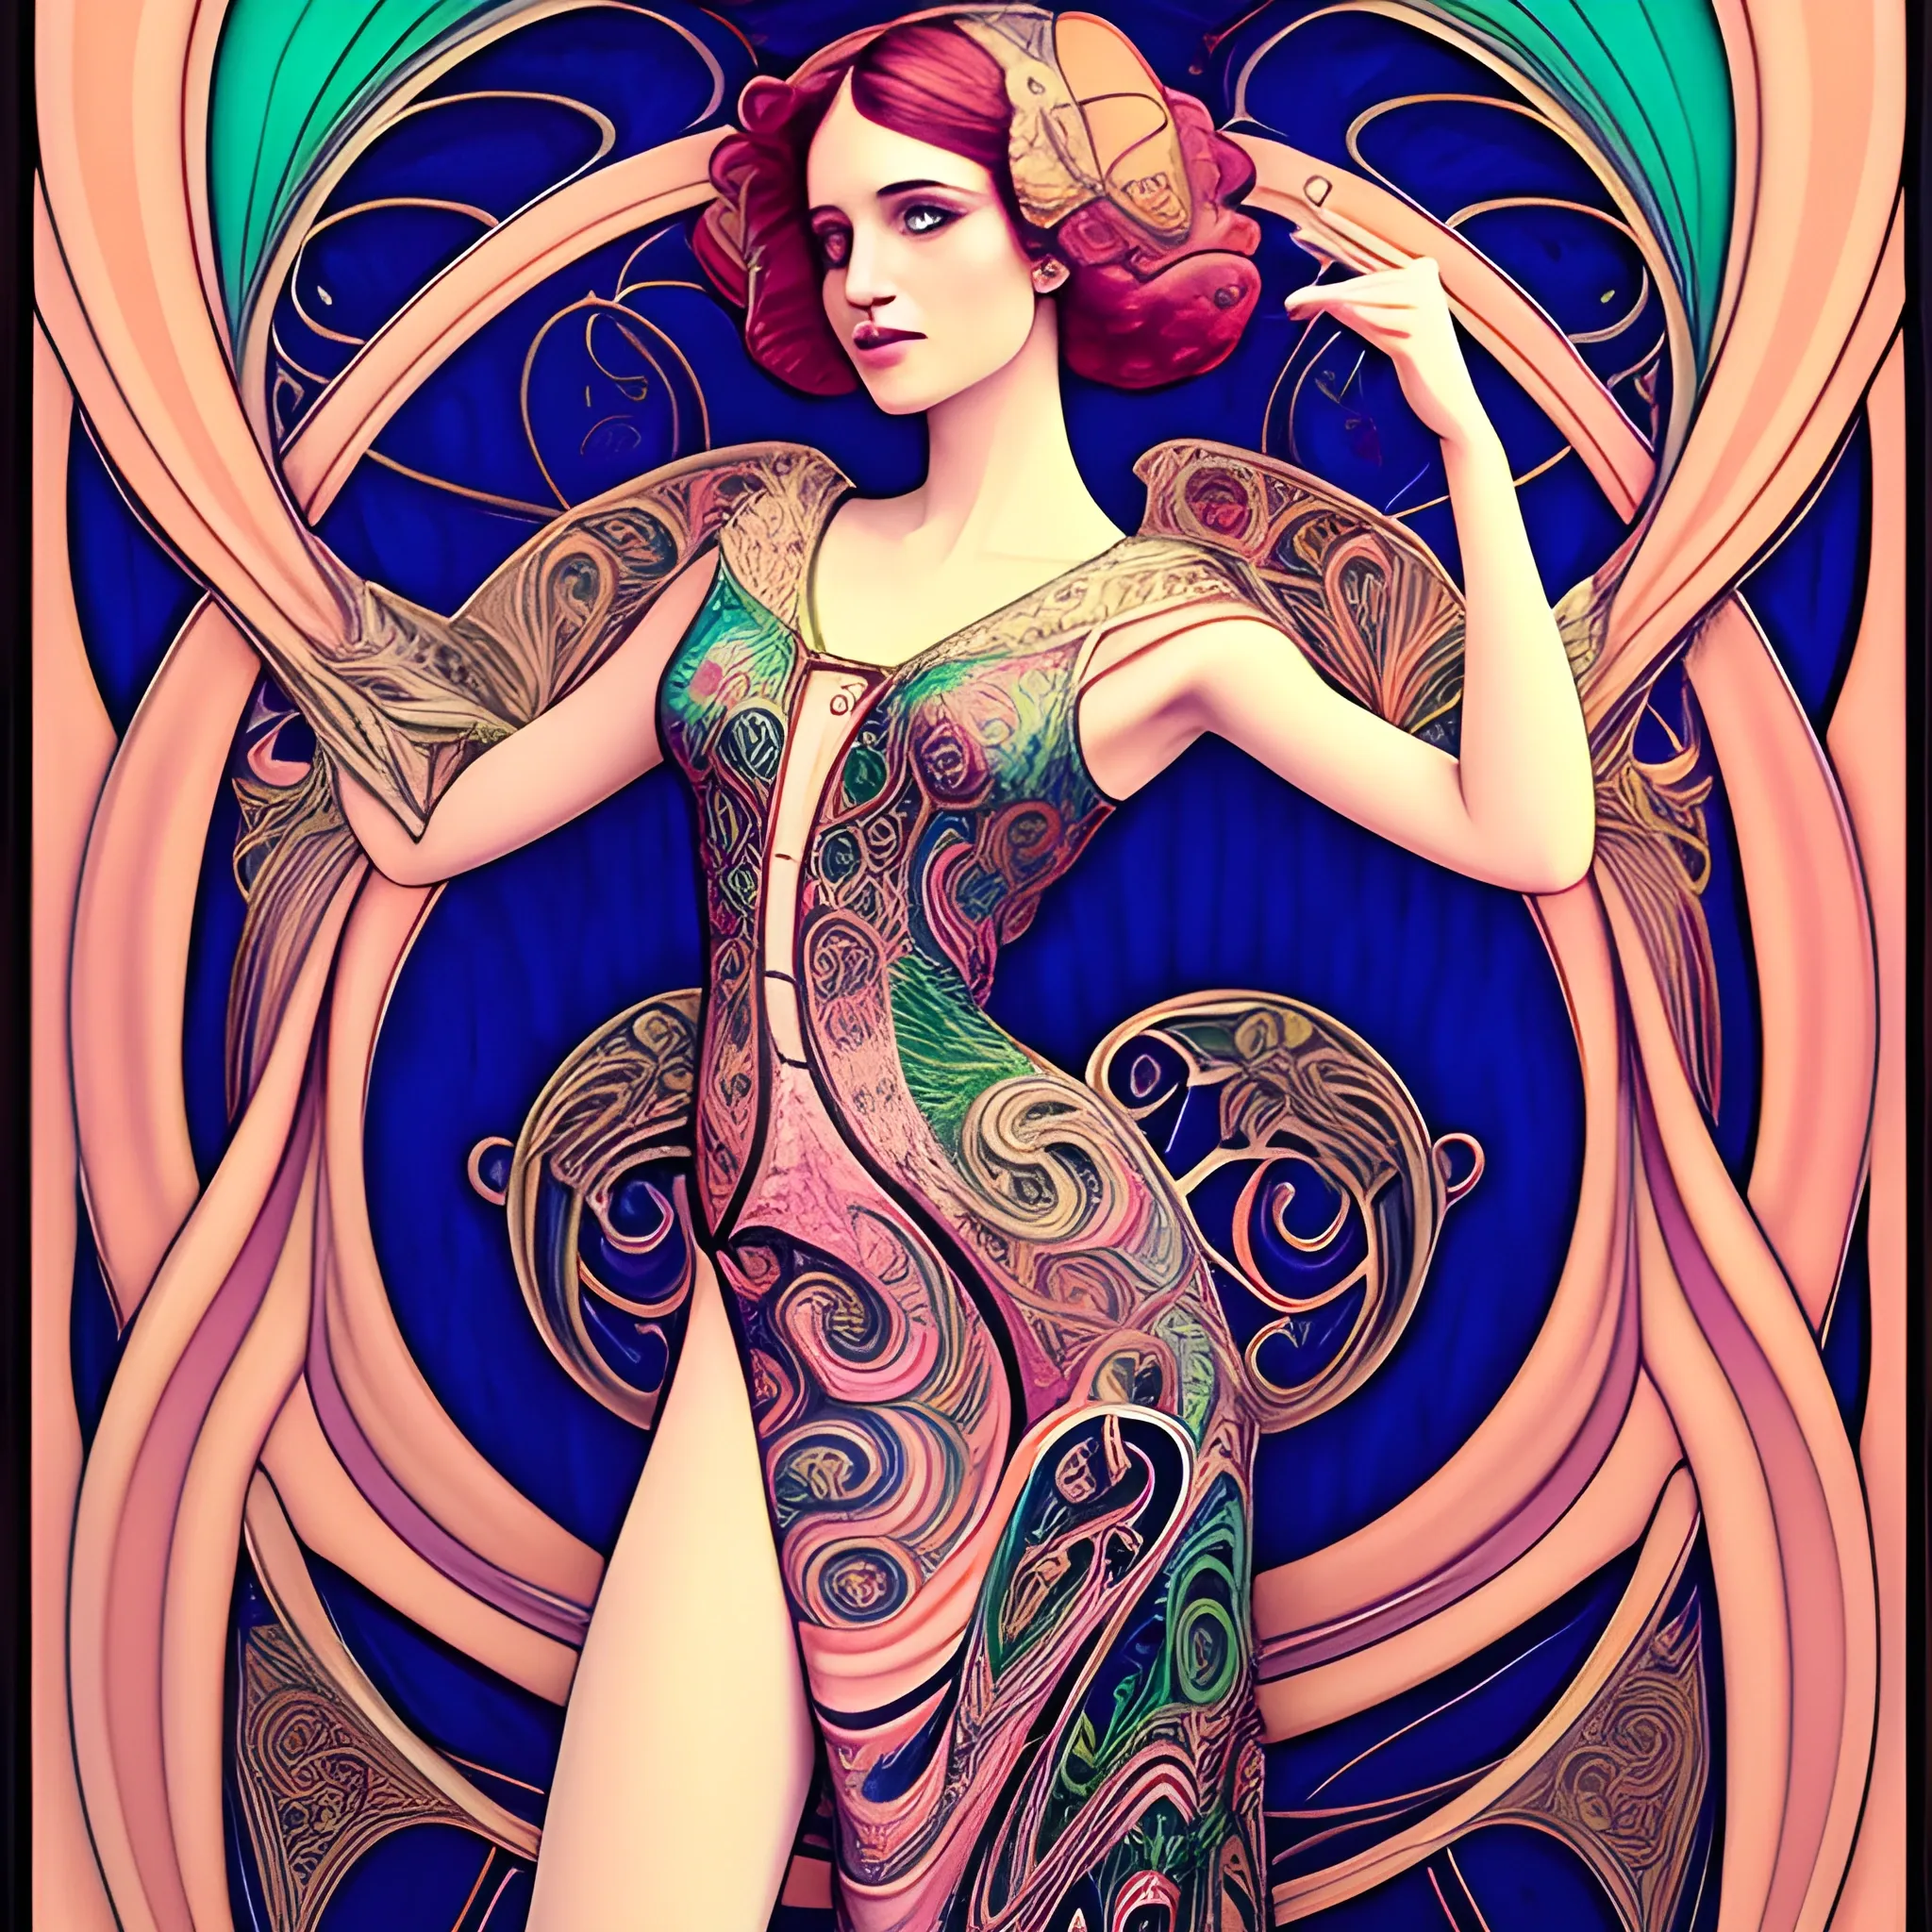 Art Nouveau painting, true aesthetics, stylish fashion shot of a beautiful woman posing in front of a psychedelic art nouveau style. Highly detailed, highest quality, 3D